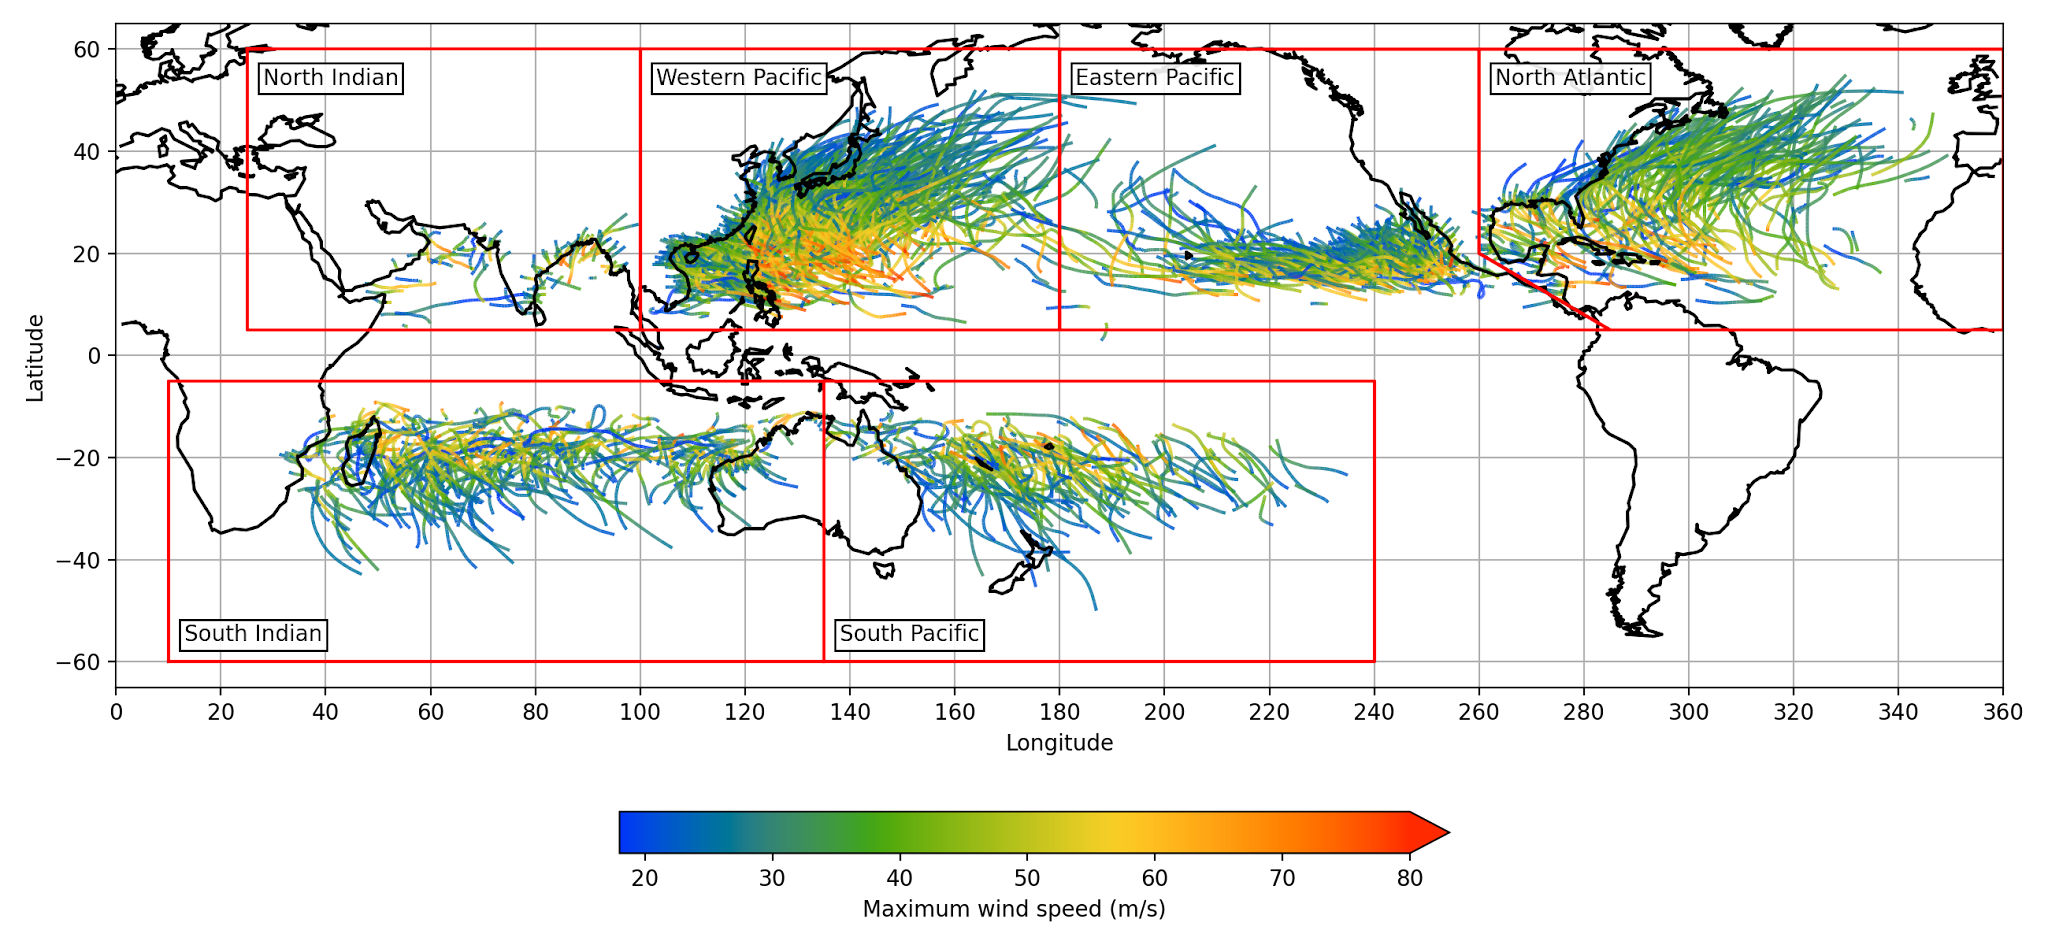 Observed tropical cyclone tracks and wind speeds